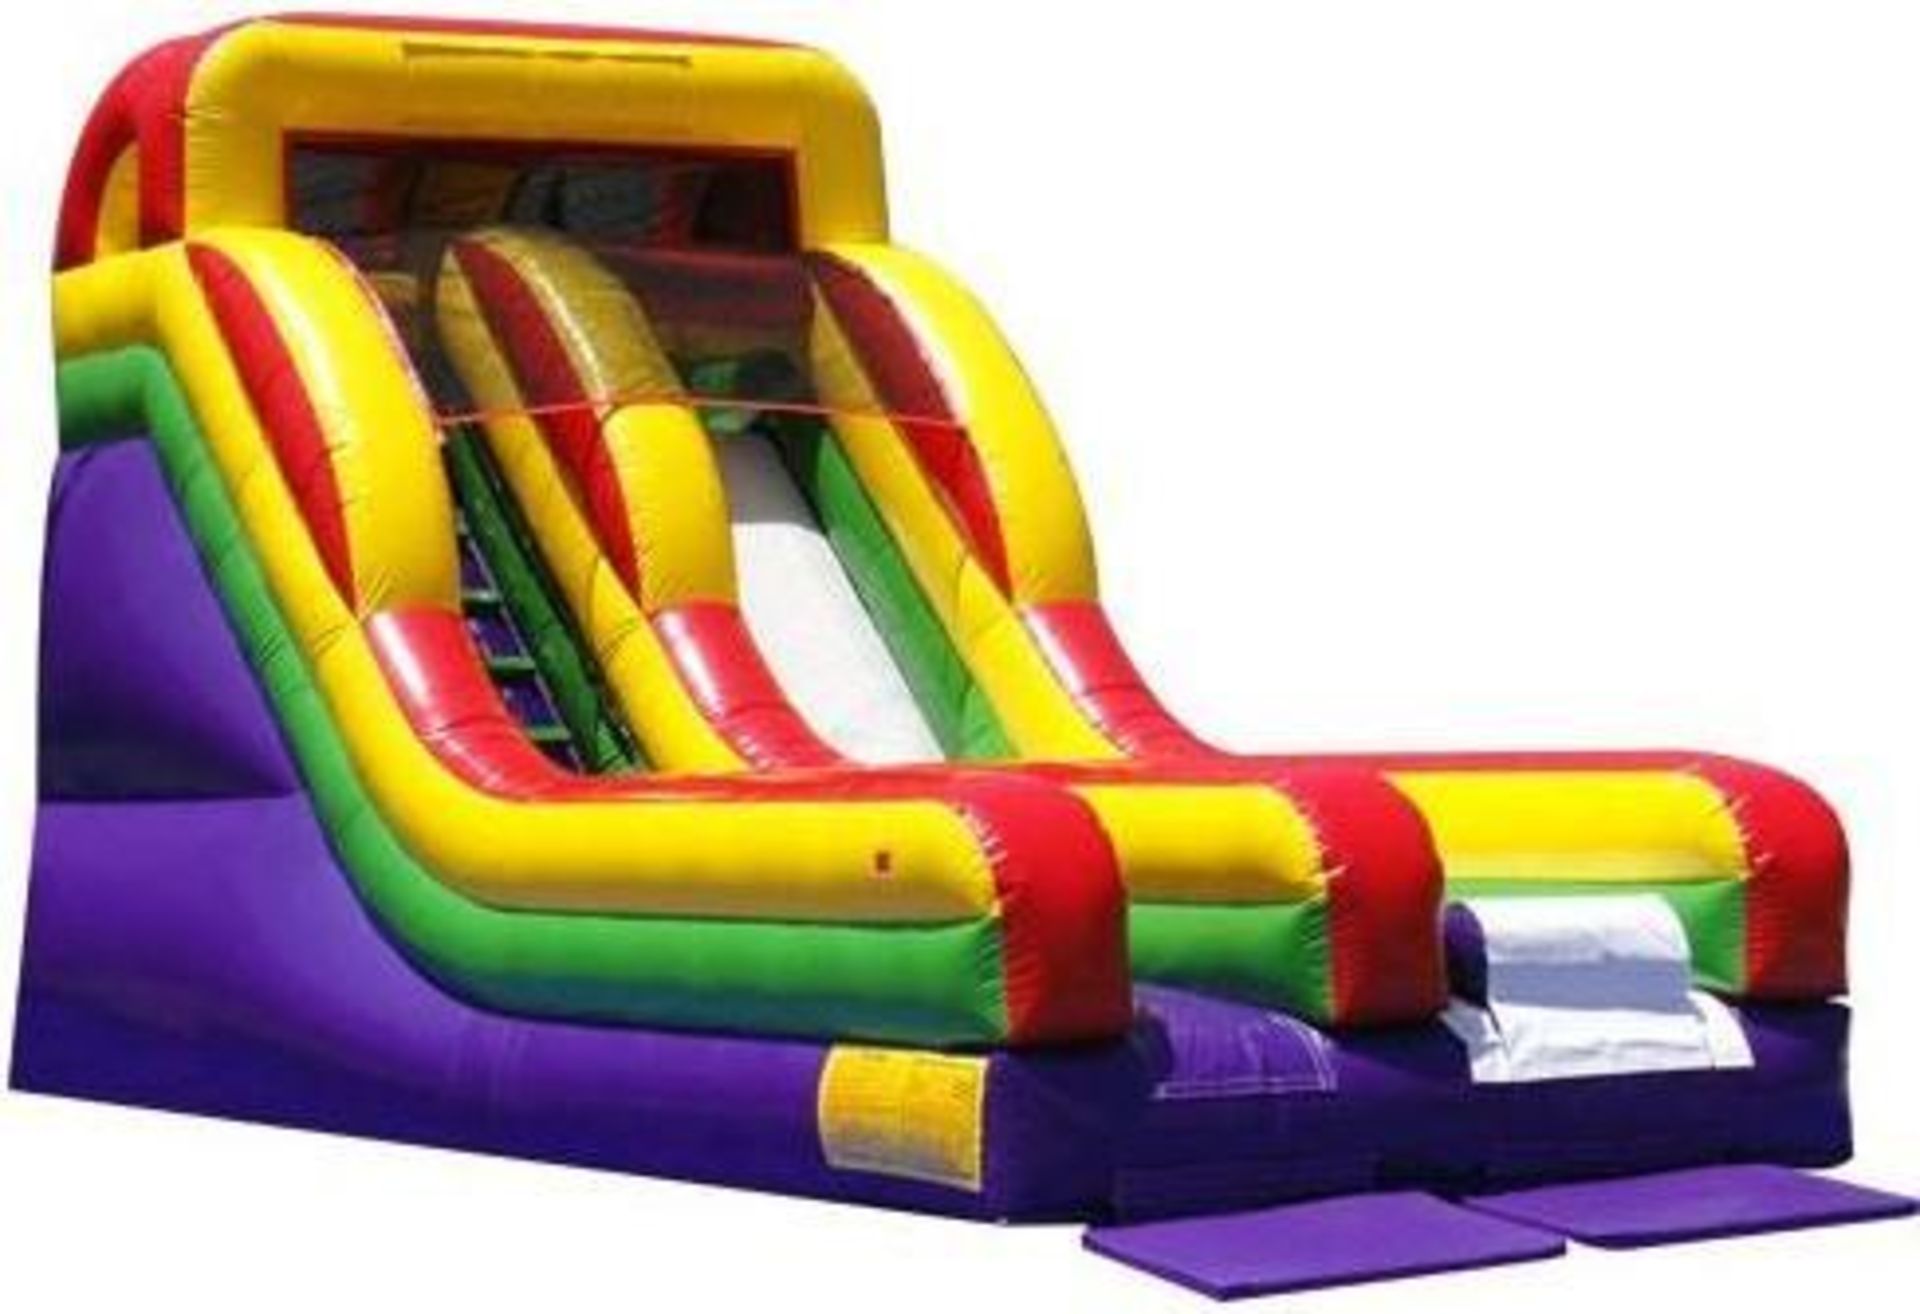 15' Dry Slide w/B-Air 1 HP Blower (Image For Reference Only, Actual Item May Look Different) (